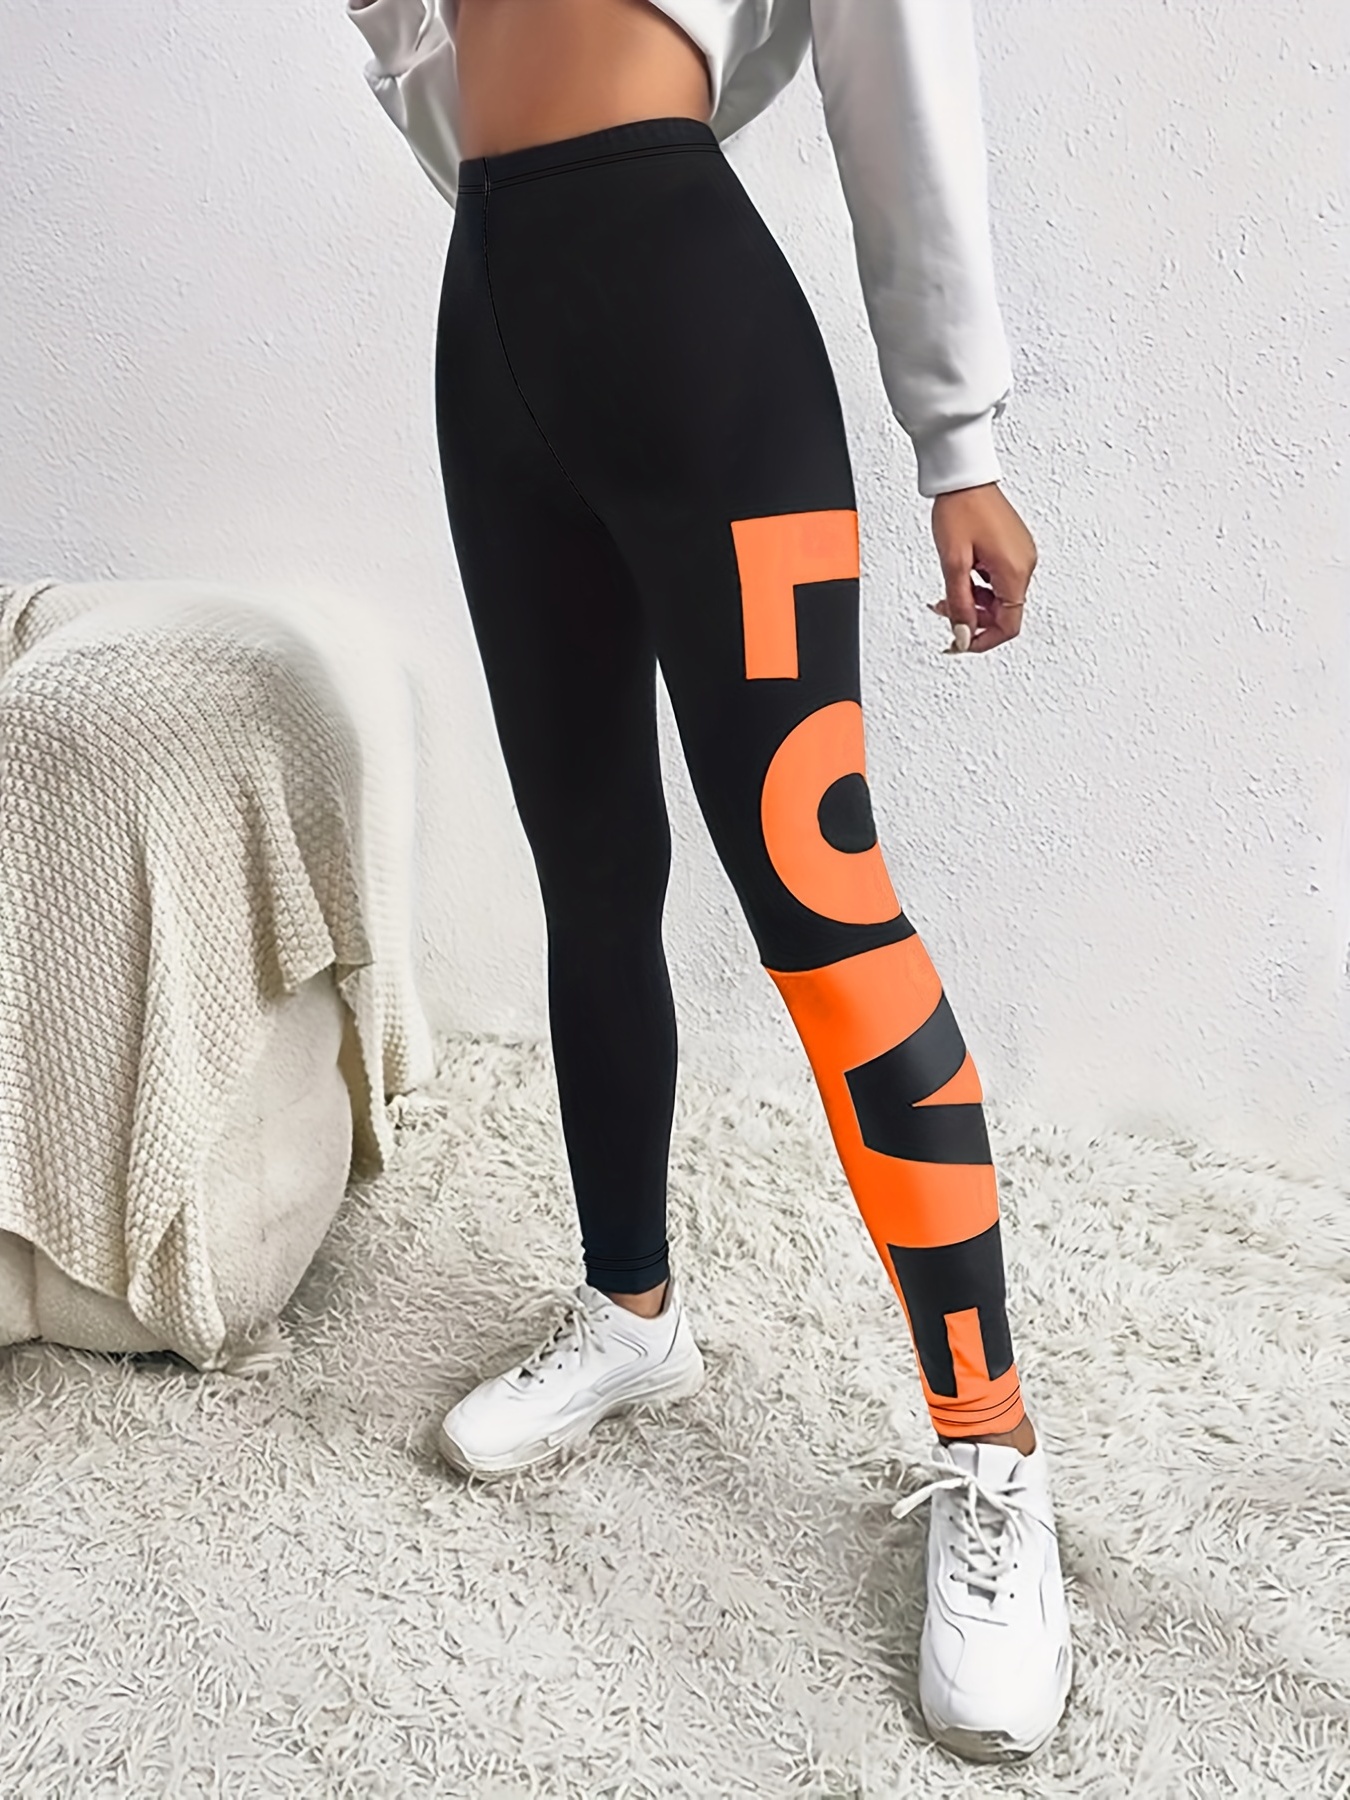 Women's Letter Love Printed Yoga Fitness Pants: Look Stylish & Feel  Comfortable During Workouts!